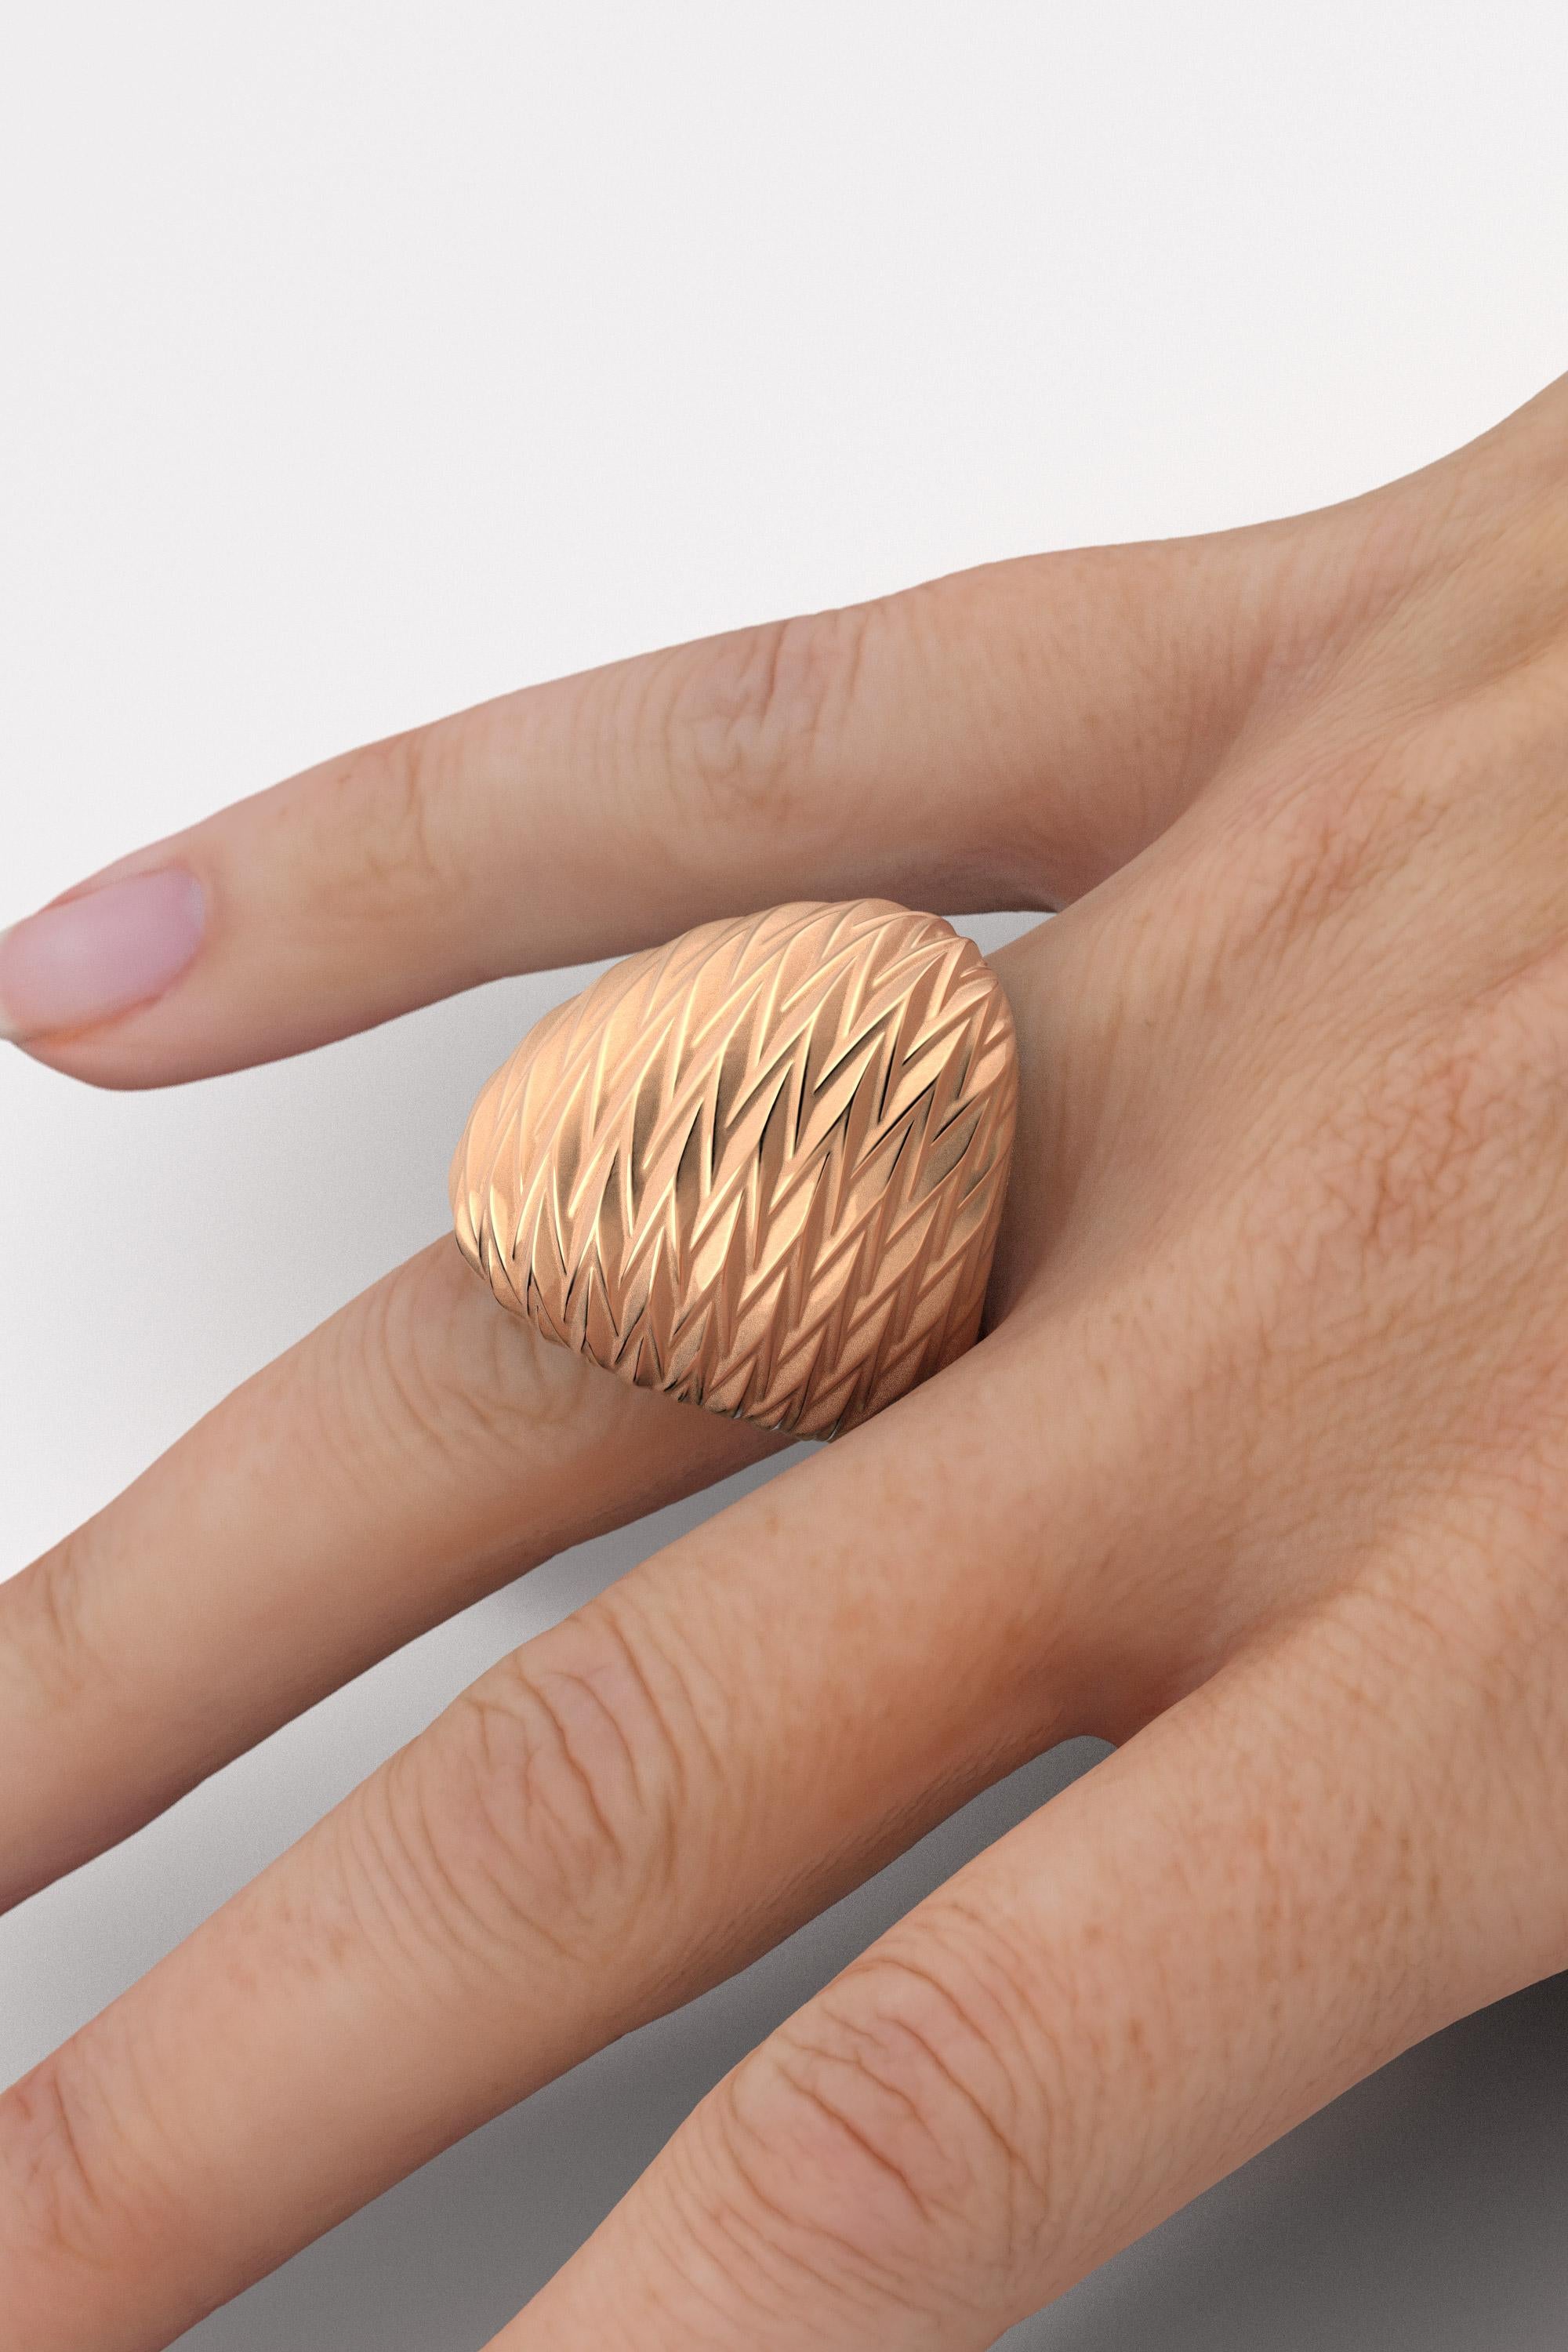 For Sale:  18k Rose Gold Ring Made in Italy, Dome Ring, Italian Fine Jewelry  5